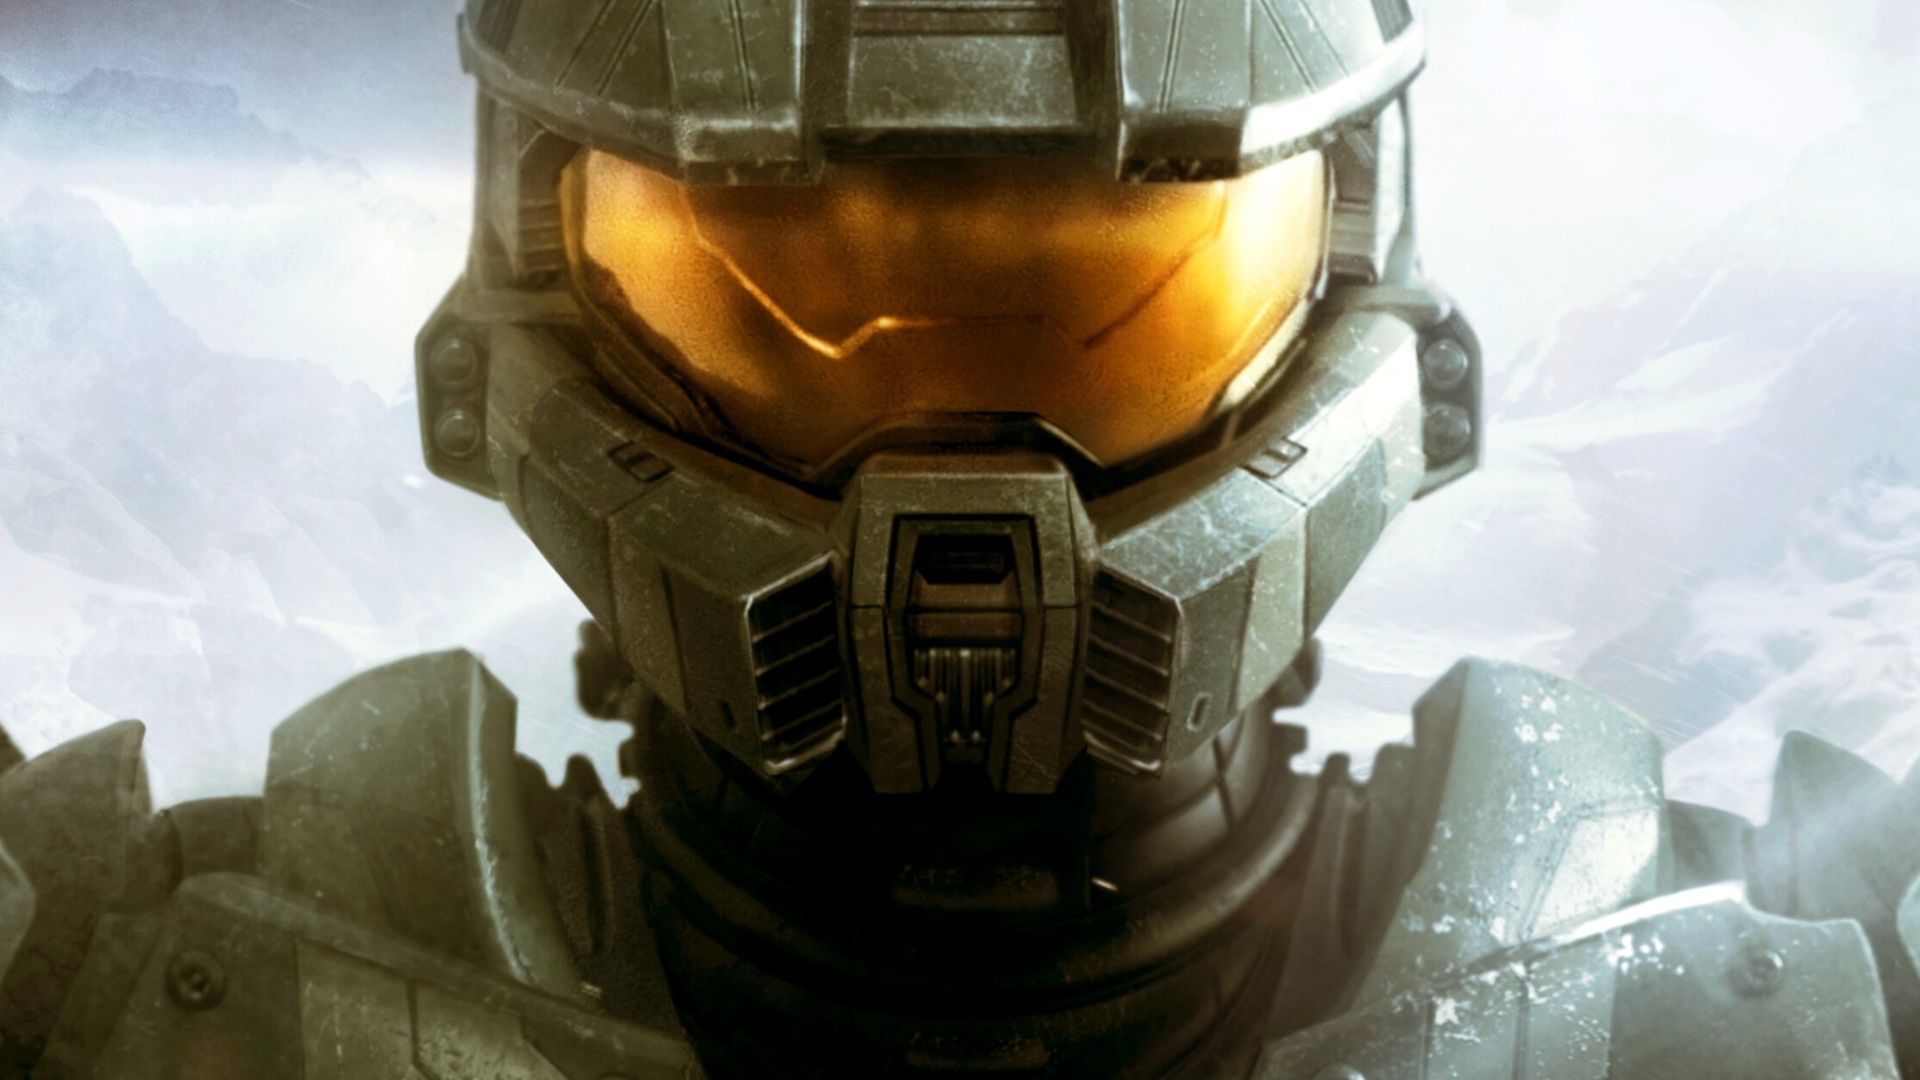 Cover art crop of Halo: Silent Storm depicting the Master Chief illustrated by Chris McGrath